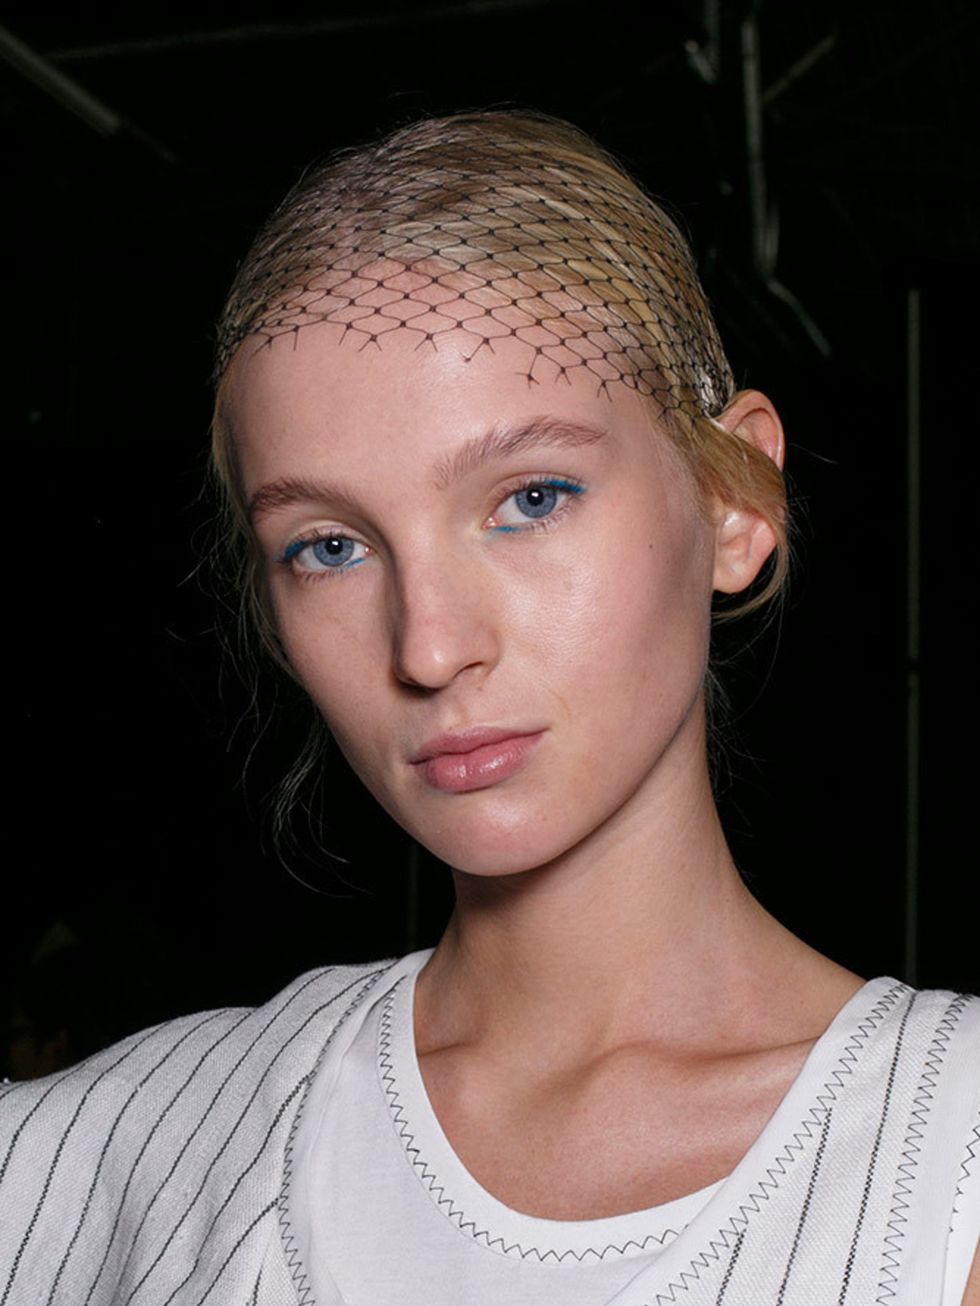 <p><a href="http://www.elleuk.com/catwalk/3-1-phillip-lim"><strong>Philip Lim s/s 2016</strong></a></p>

<p>The look: New Romantic Cut-Out Liner</p>

<p>Make Up Artist: Francelle Daly for Nars</p>

<p>Key product: Nars Eye Paint in Solomon Islands</p>

<p